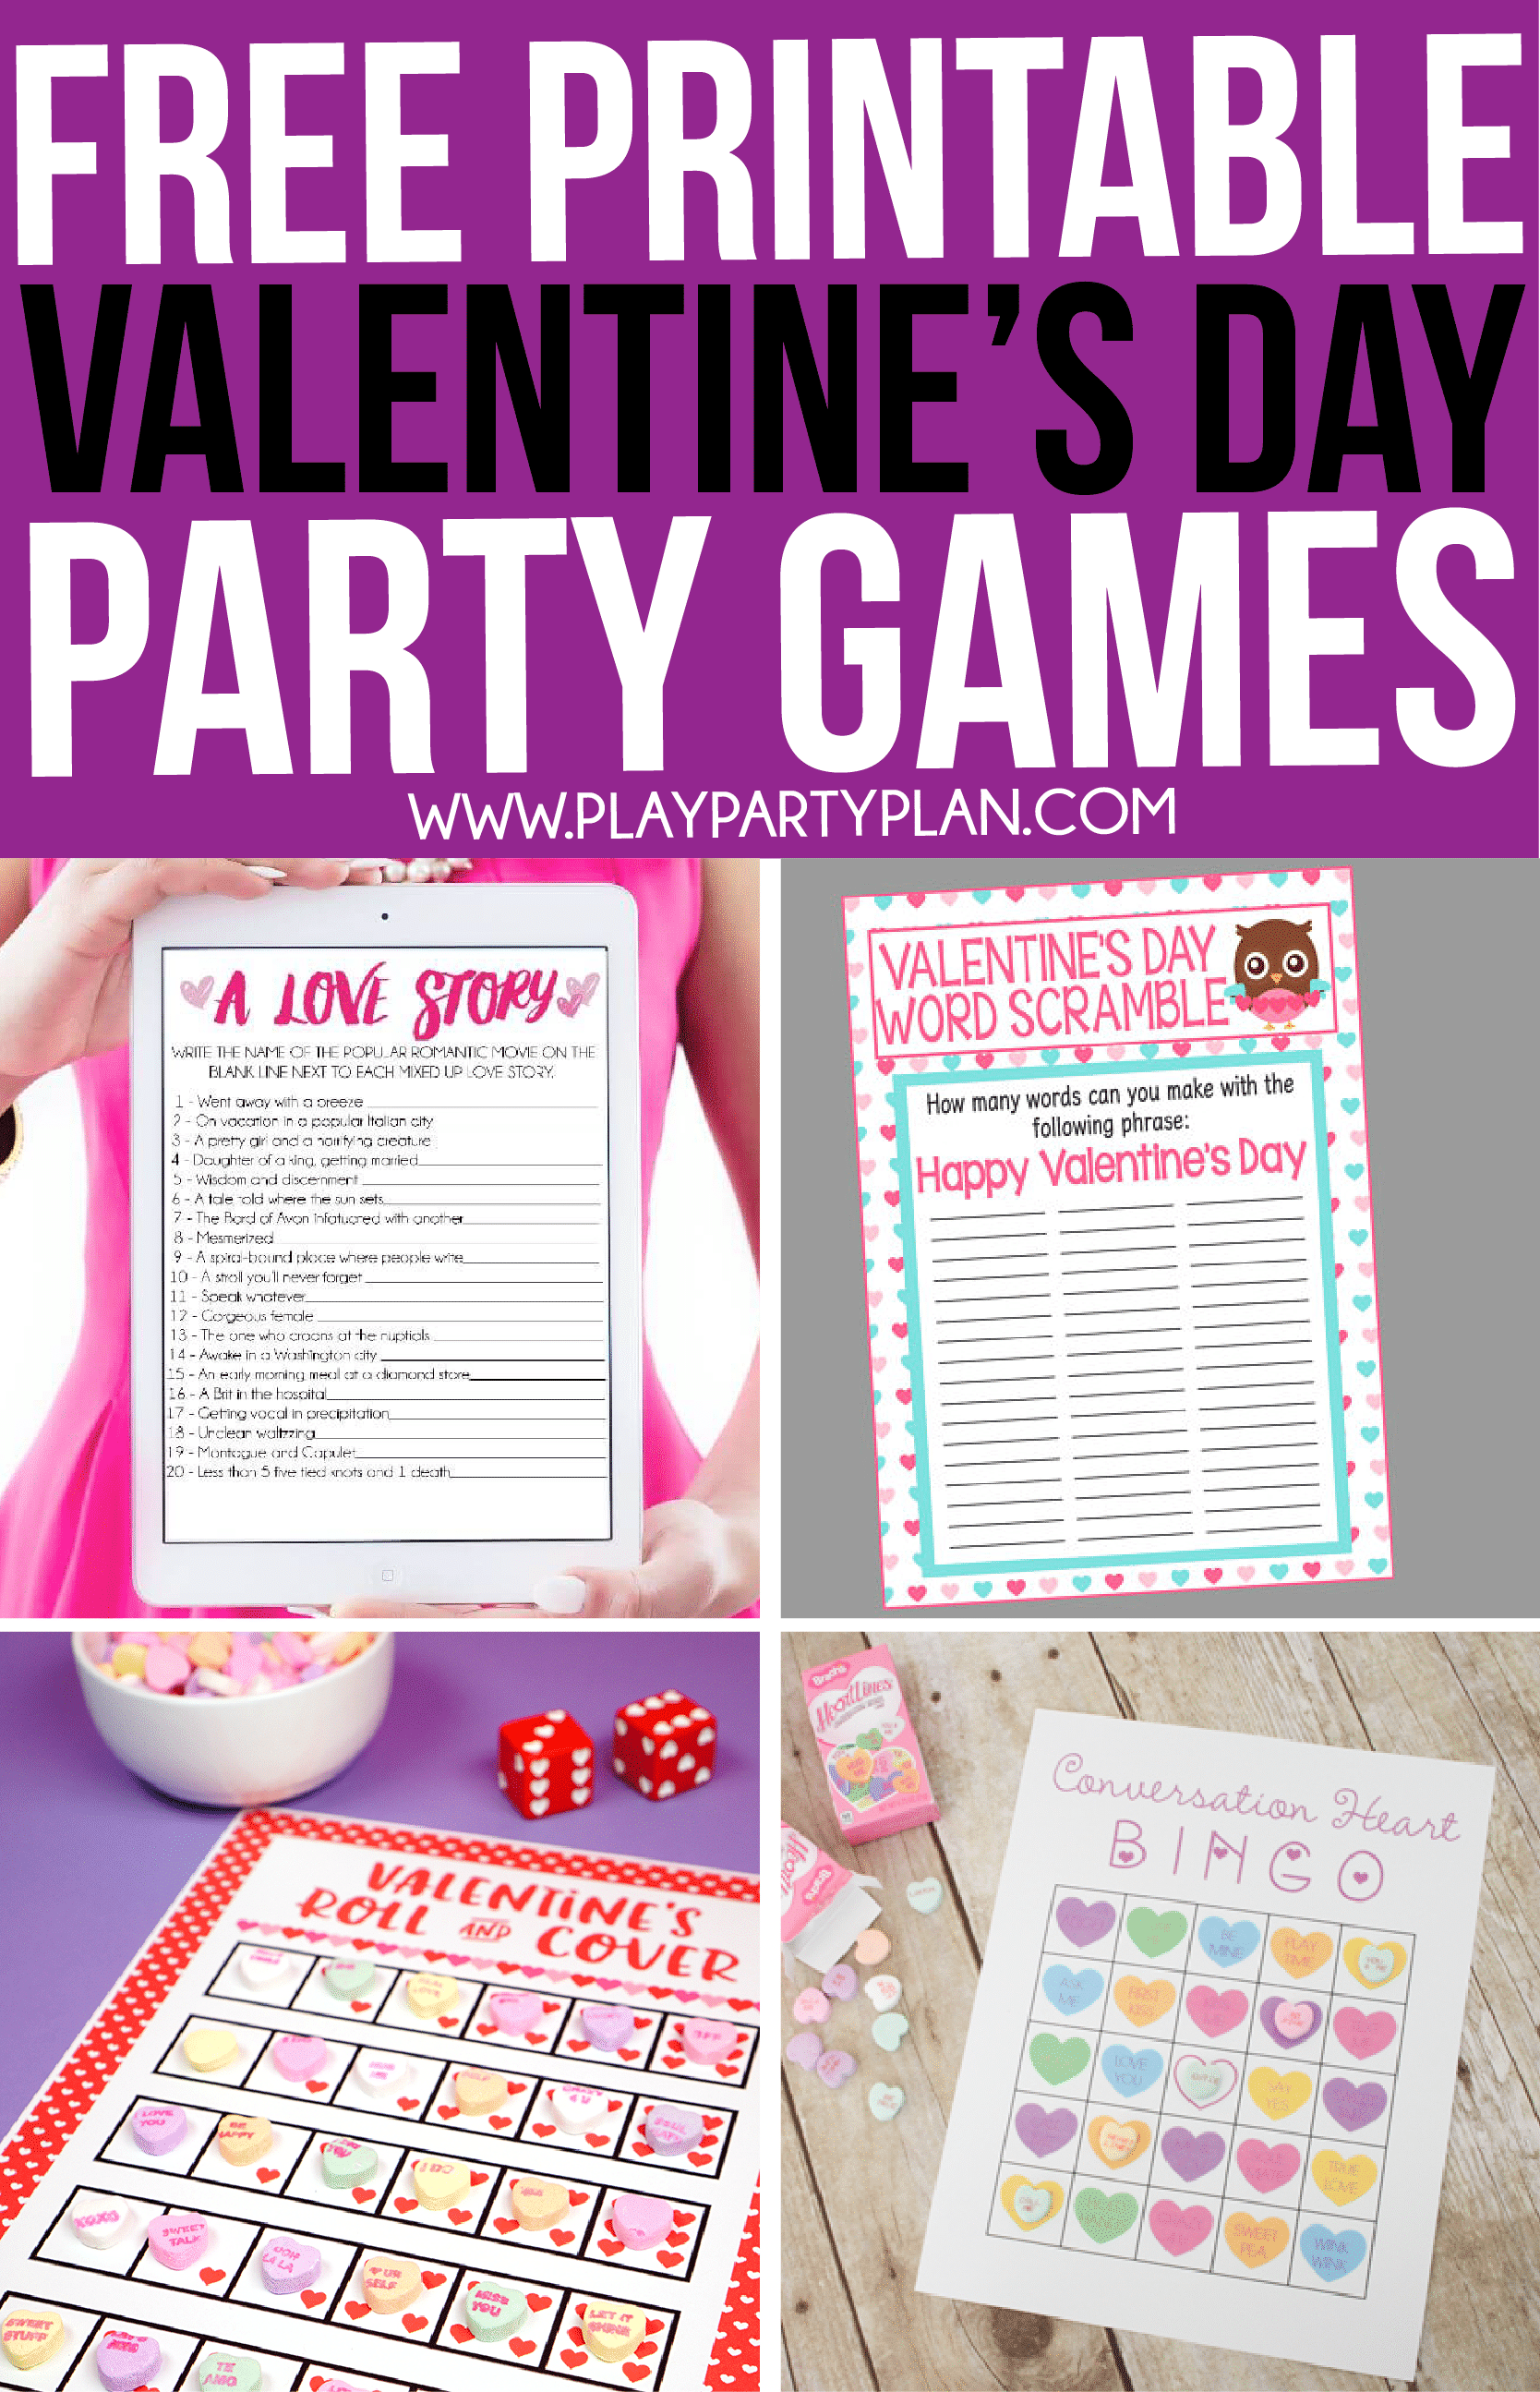 35 Fun Valentine's Day Games Everyone Will Love Play Party Plan